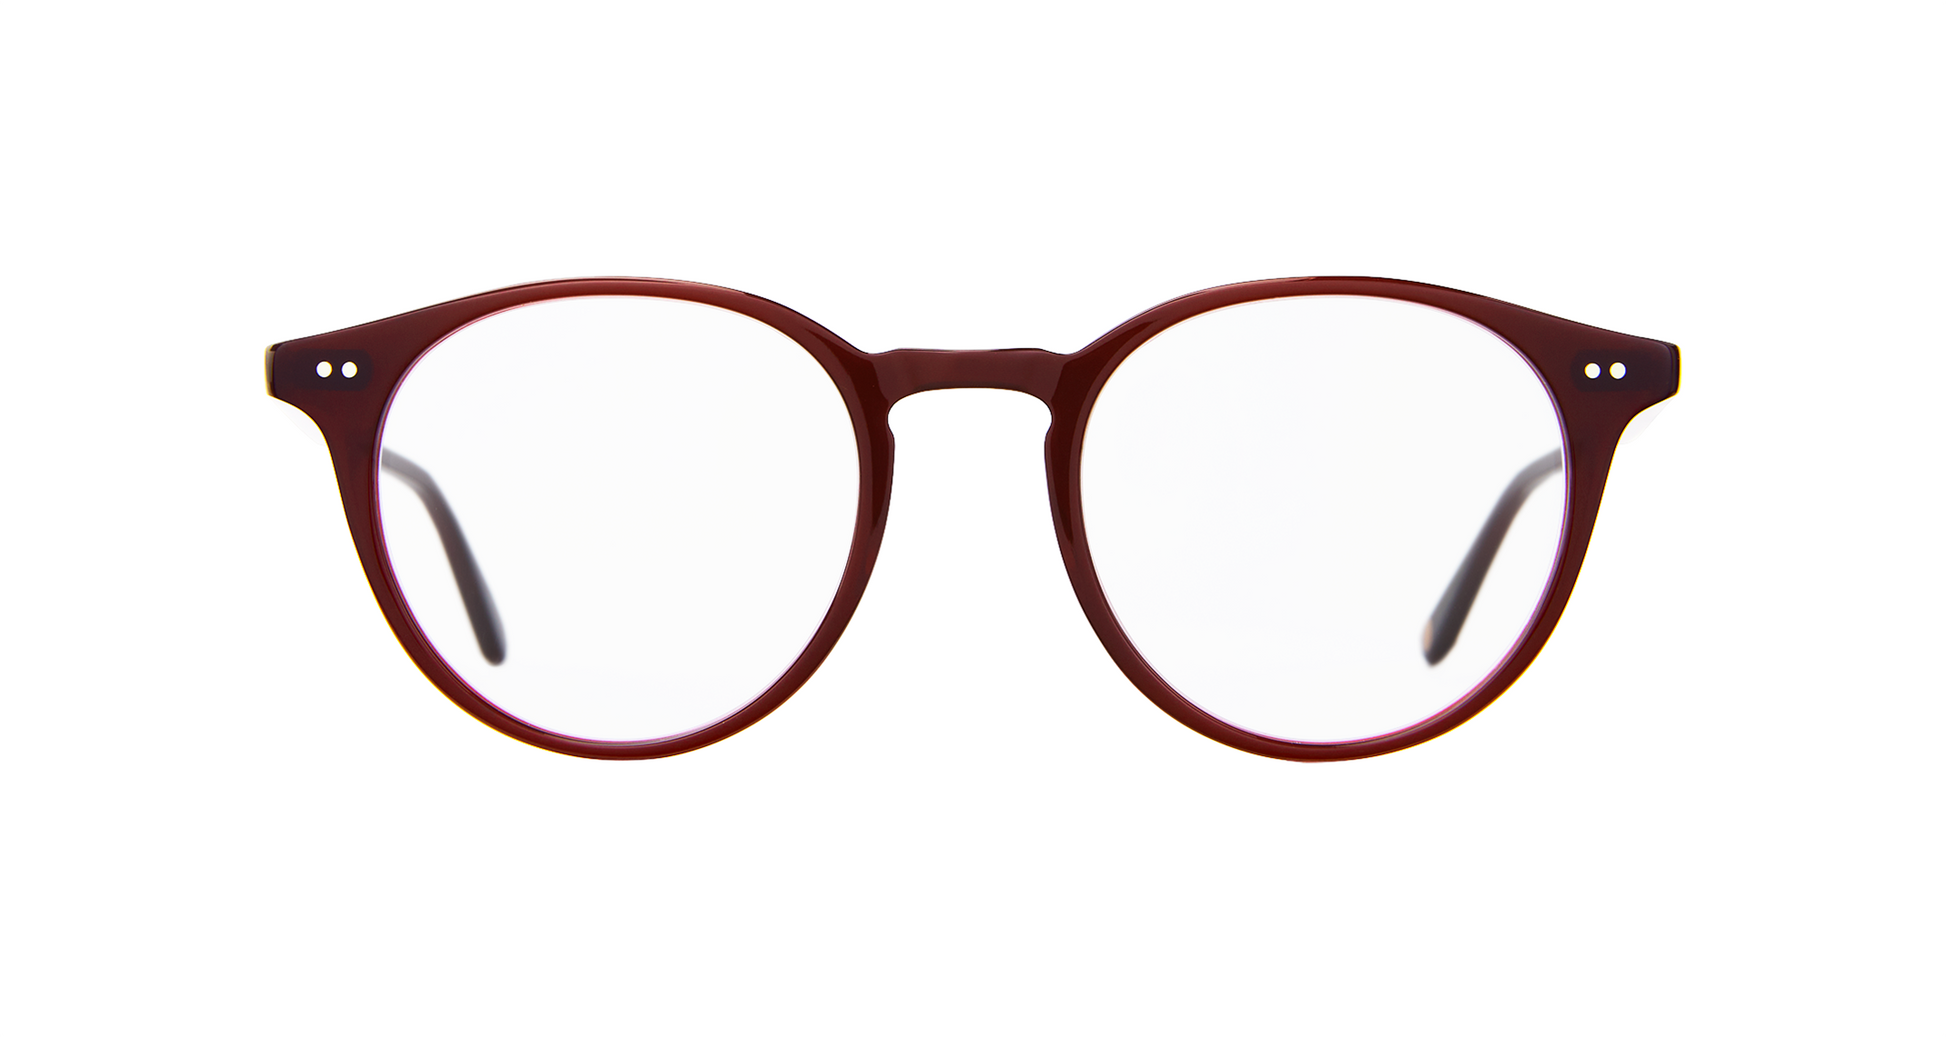 Inspired by the mid-century, Clune Barolo is a modern take on the classic P3 eyeglass silhouette, with a distinctive round shape and lightweight acetate construction. Hand Finished in LA. Now Available in Toronto, Canada.